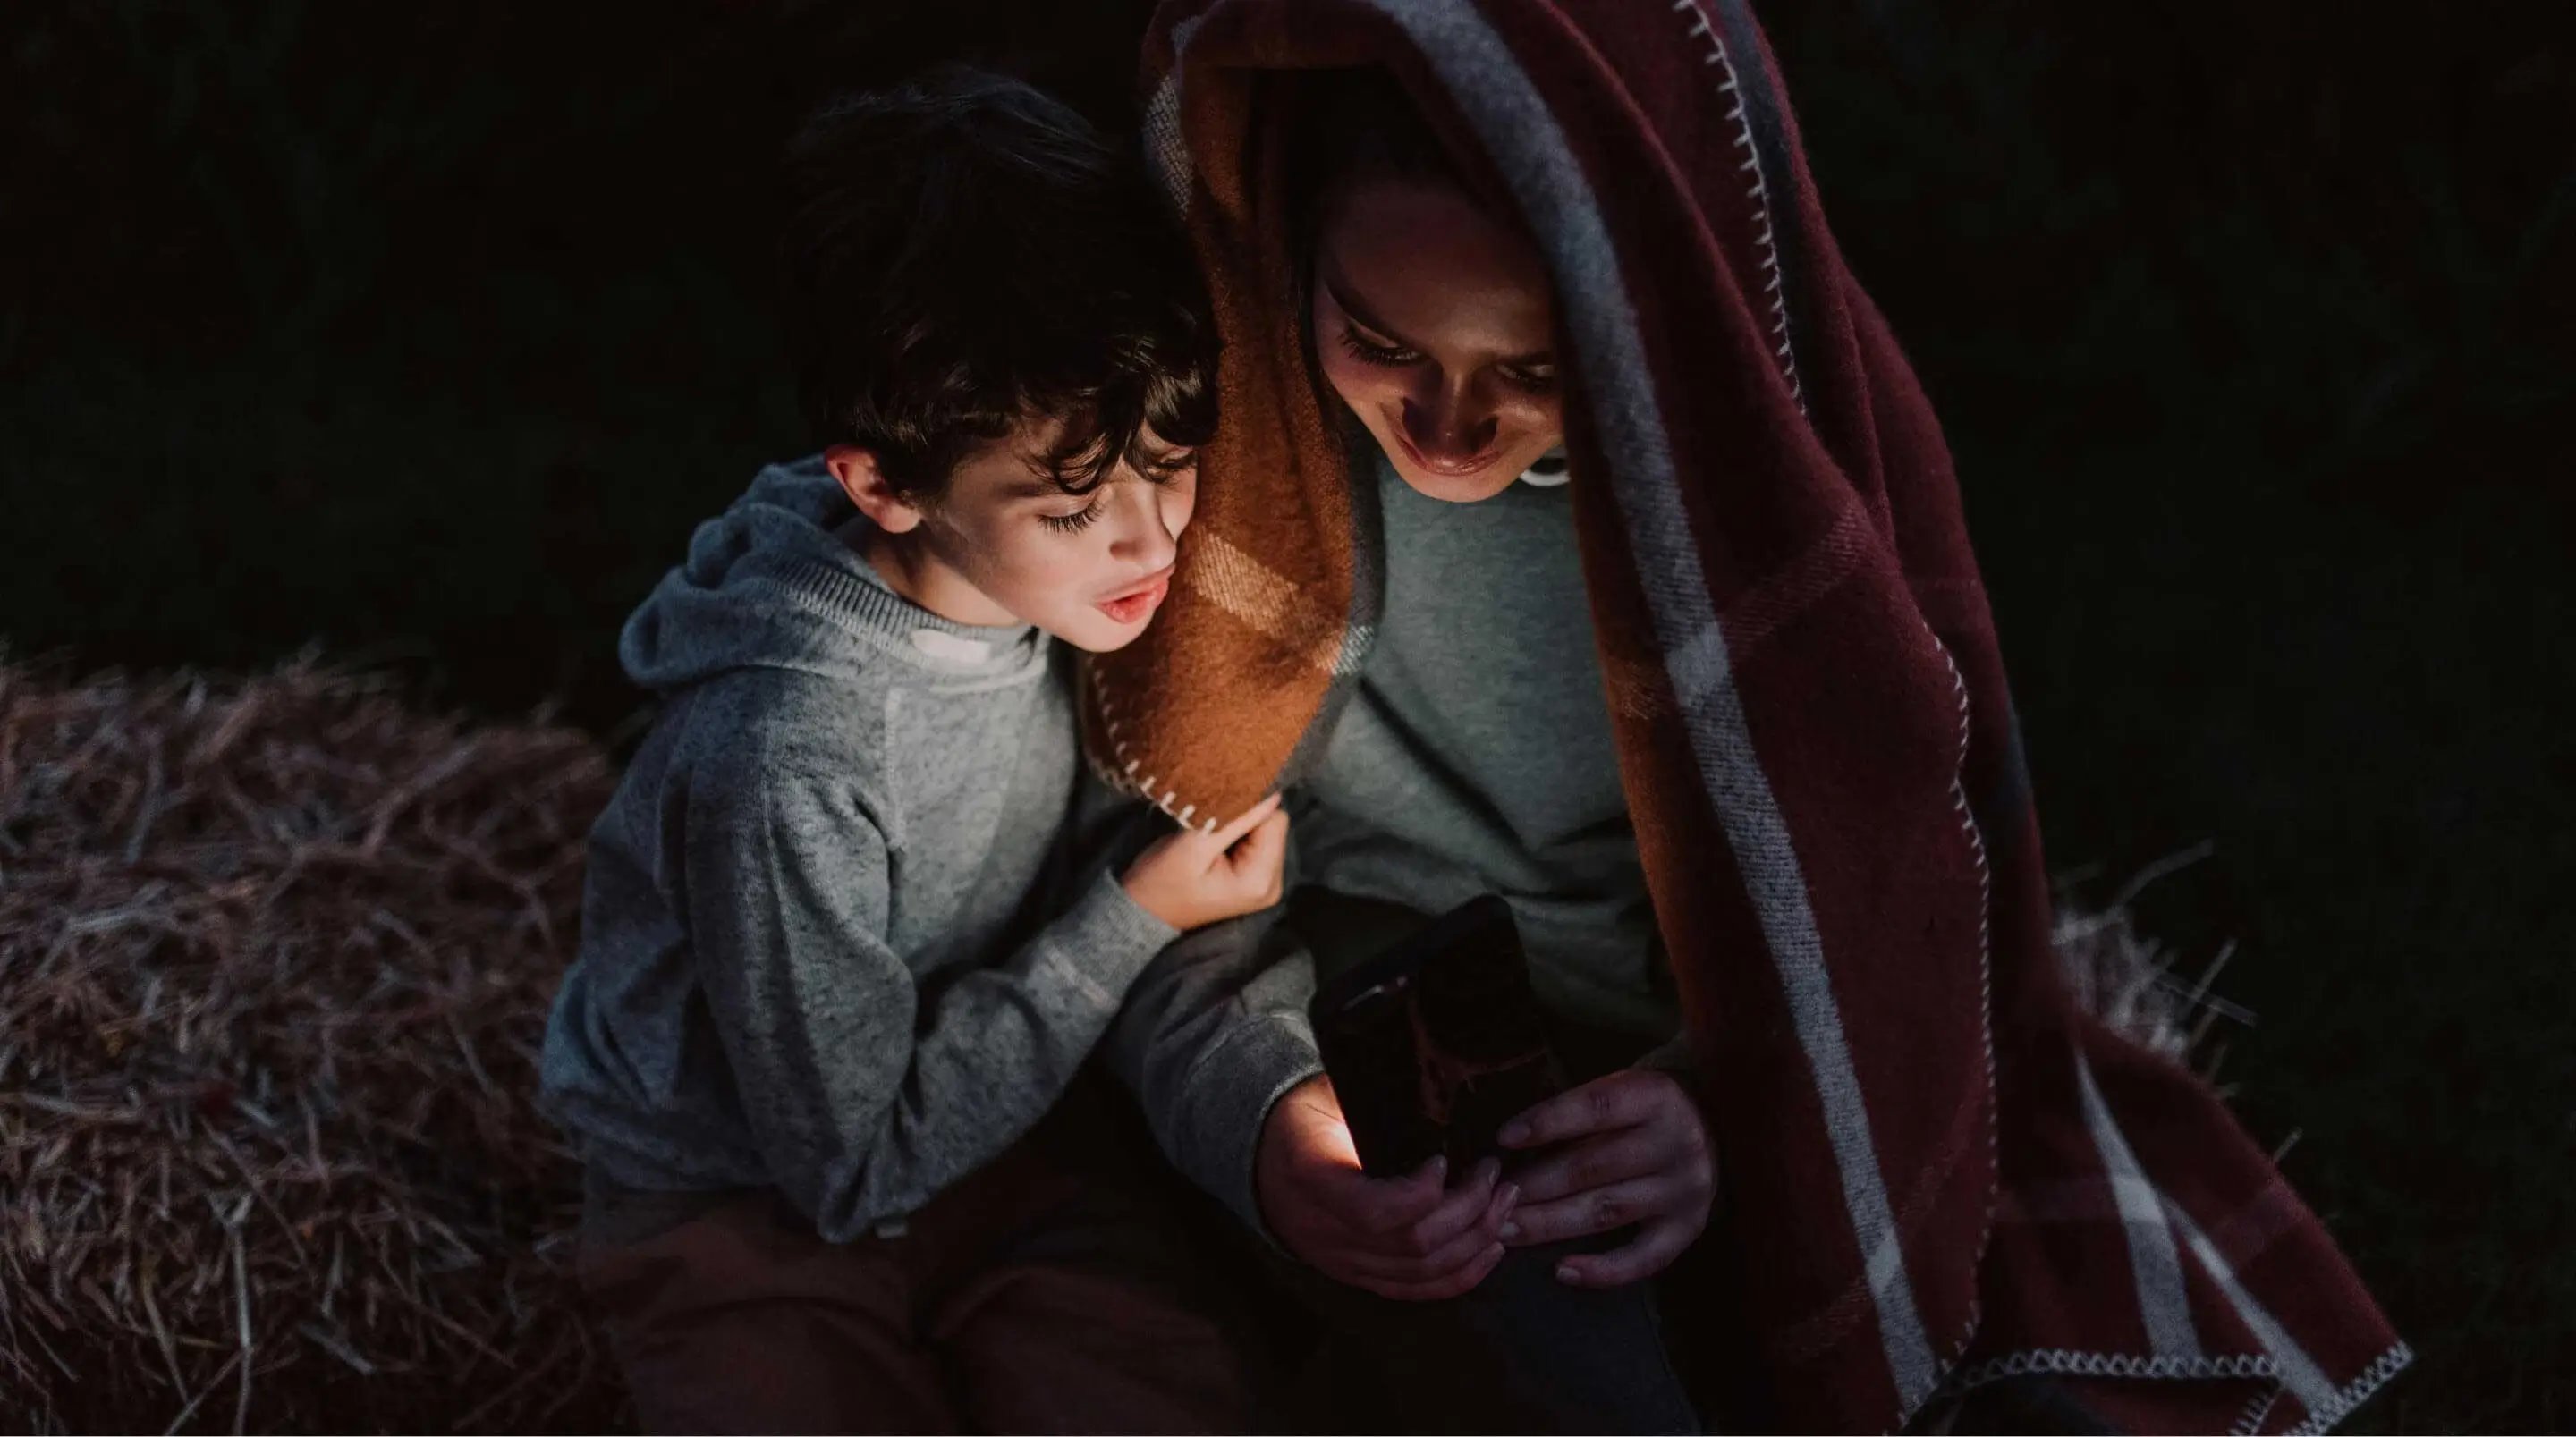 Mum and son looking at a glowing phone screen while camping